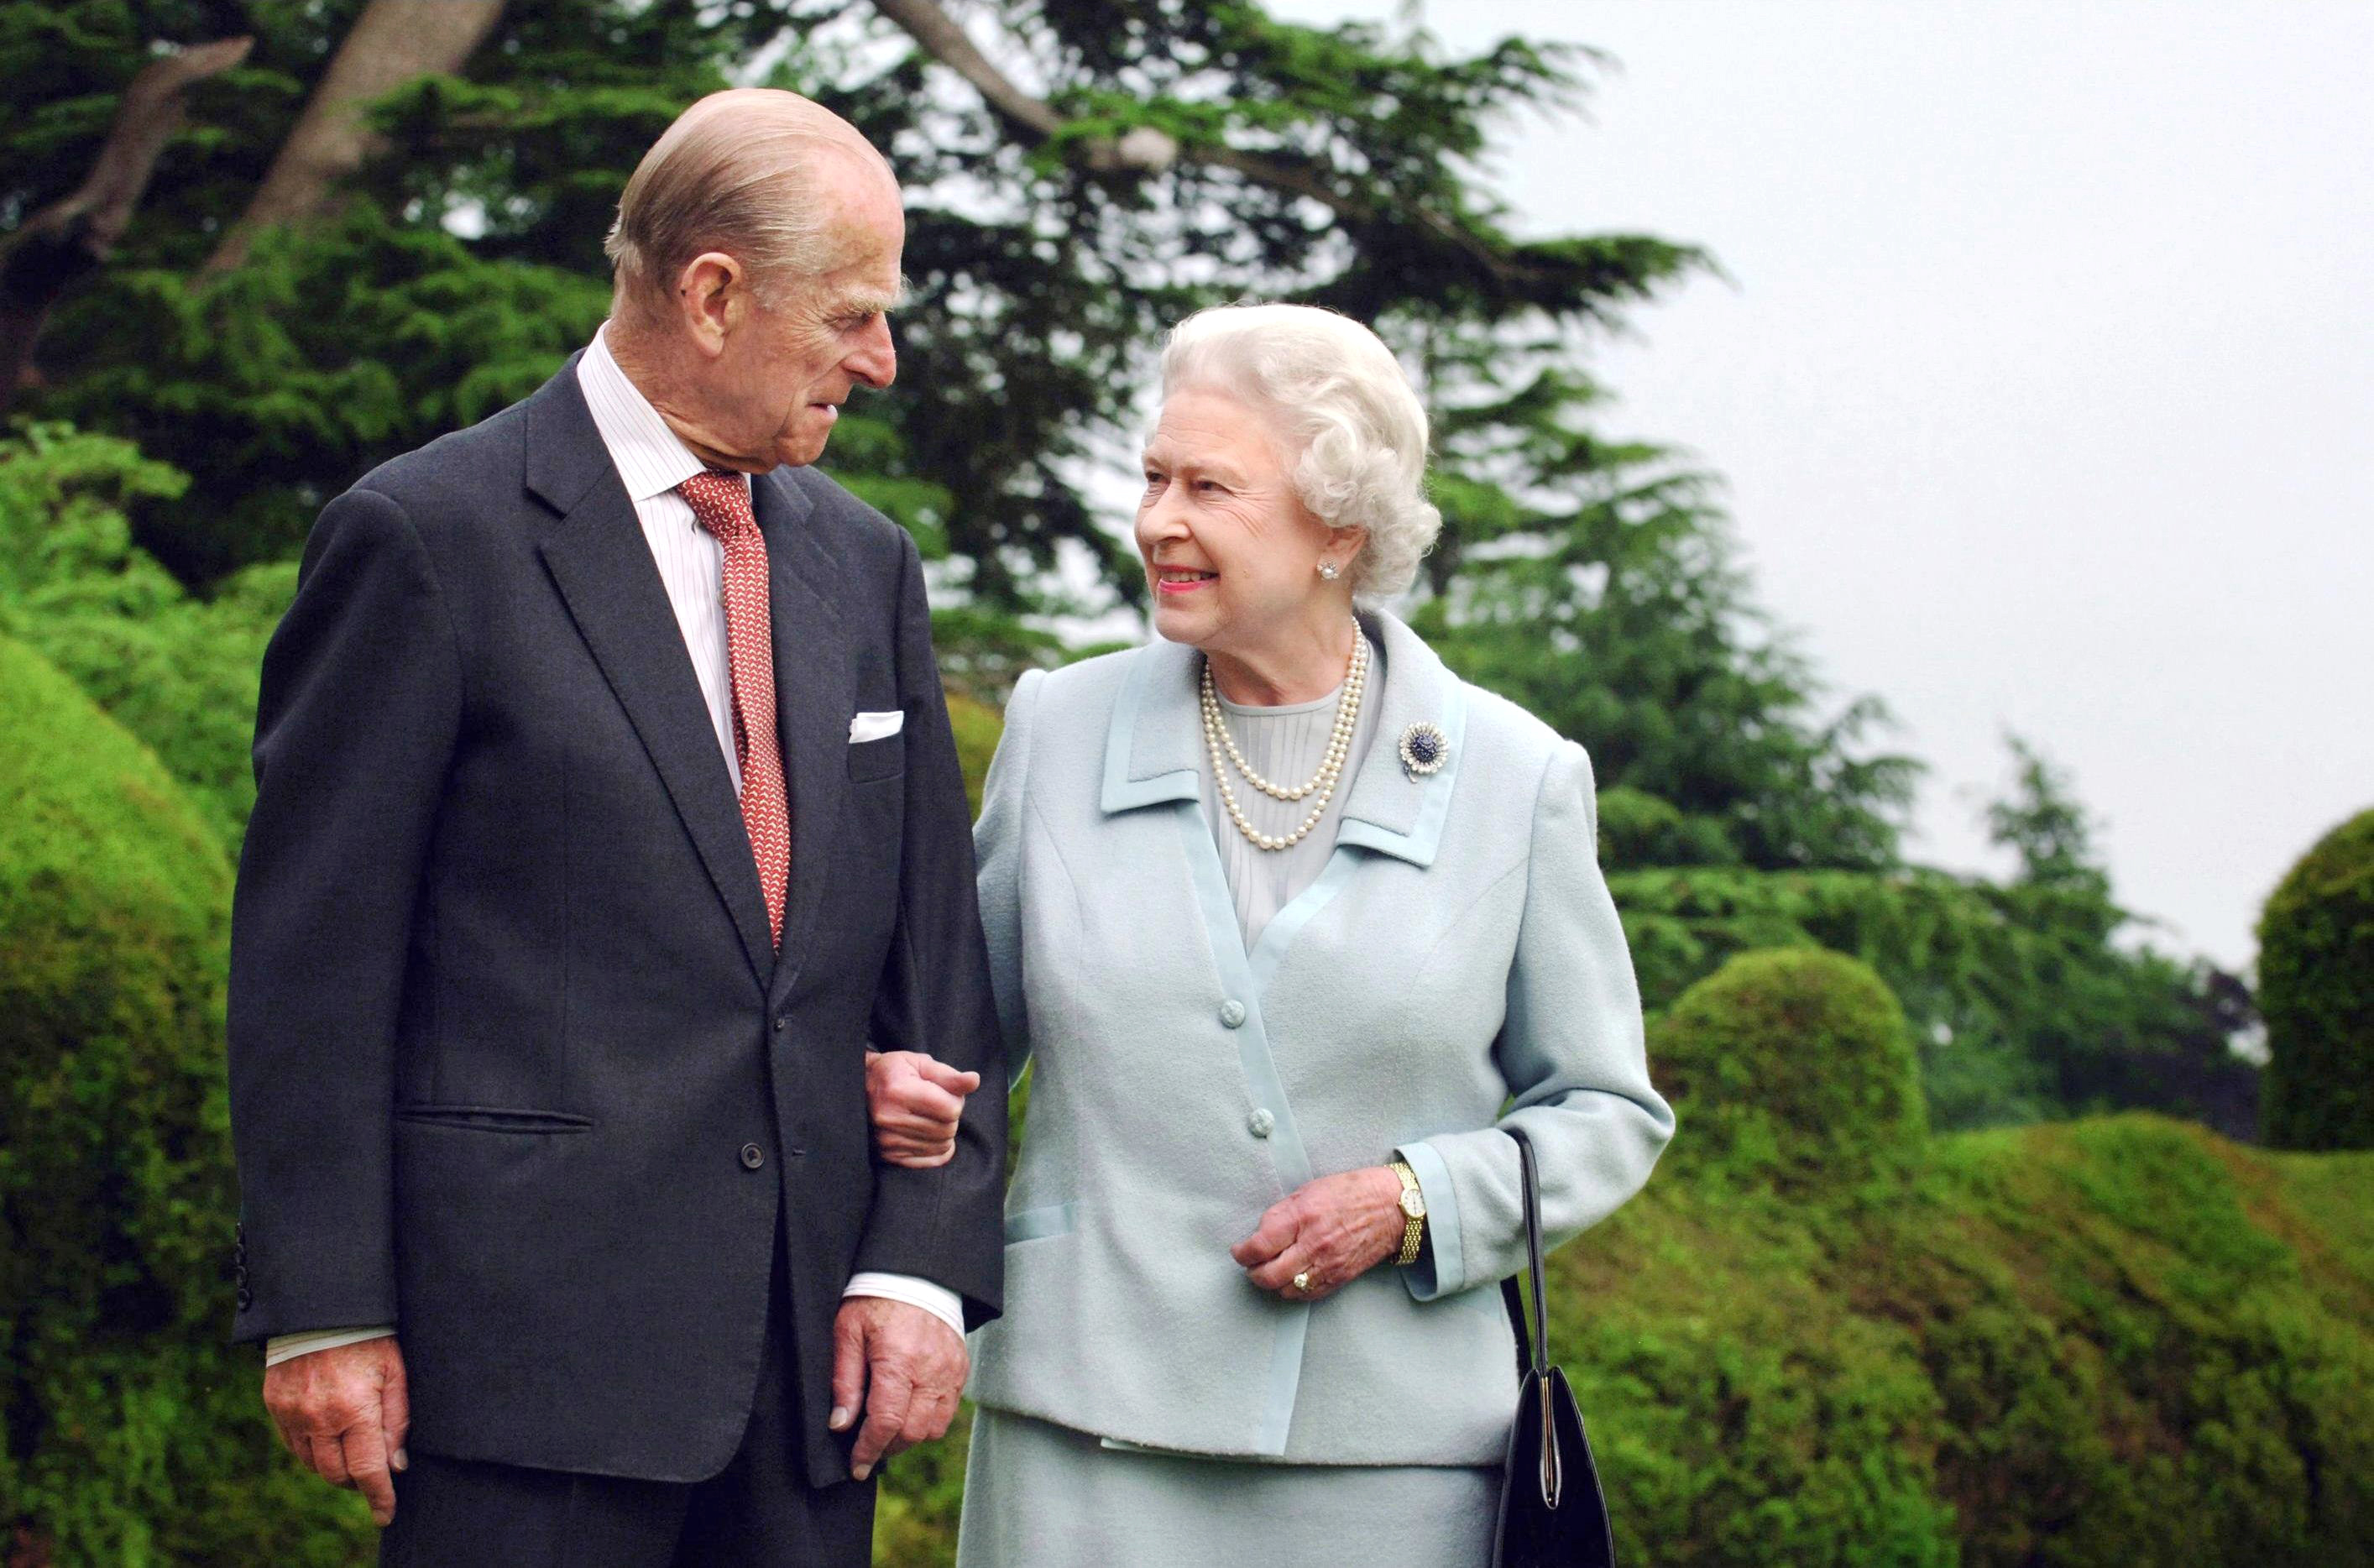 Prince Philip and Queen Elizabeth II gazing at each other and walking arm-in-arm on diamond wedding anniversary